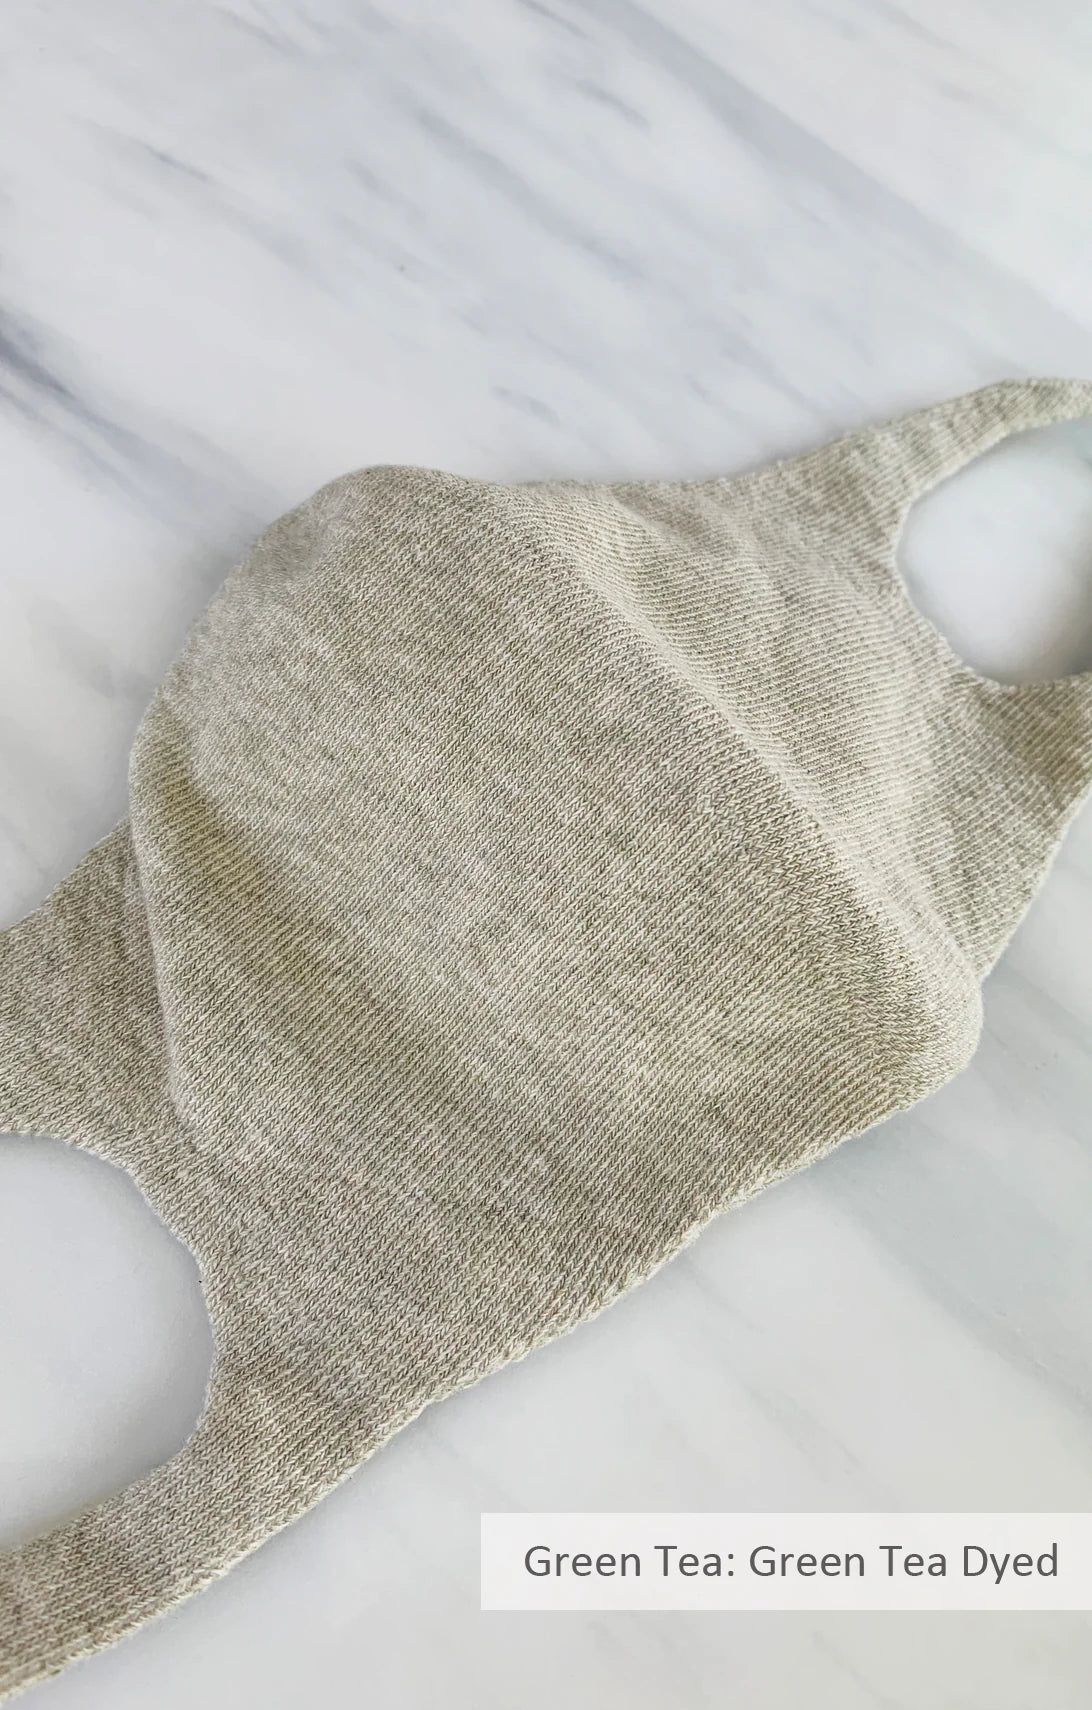 Green Tea color of Botanical Dyed Organic Cotton Face Mask by Tabbisocks Wellness